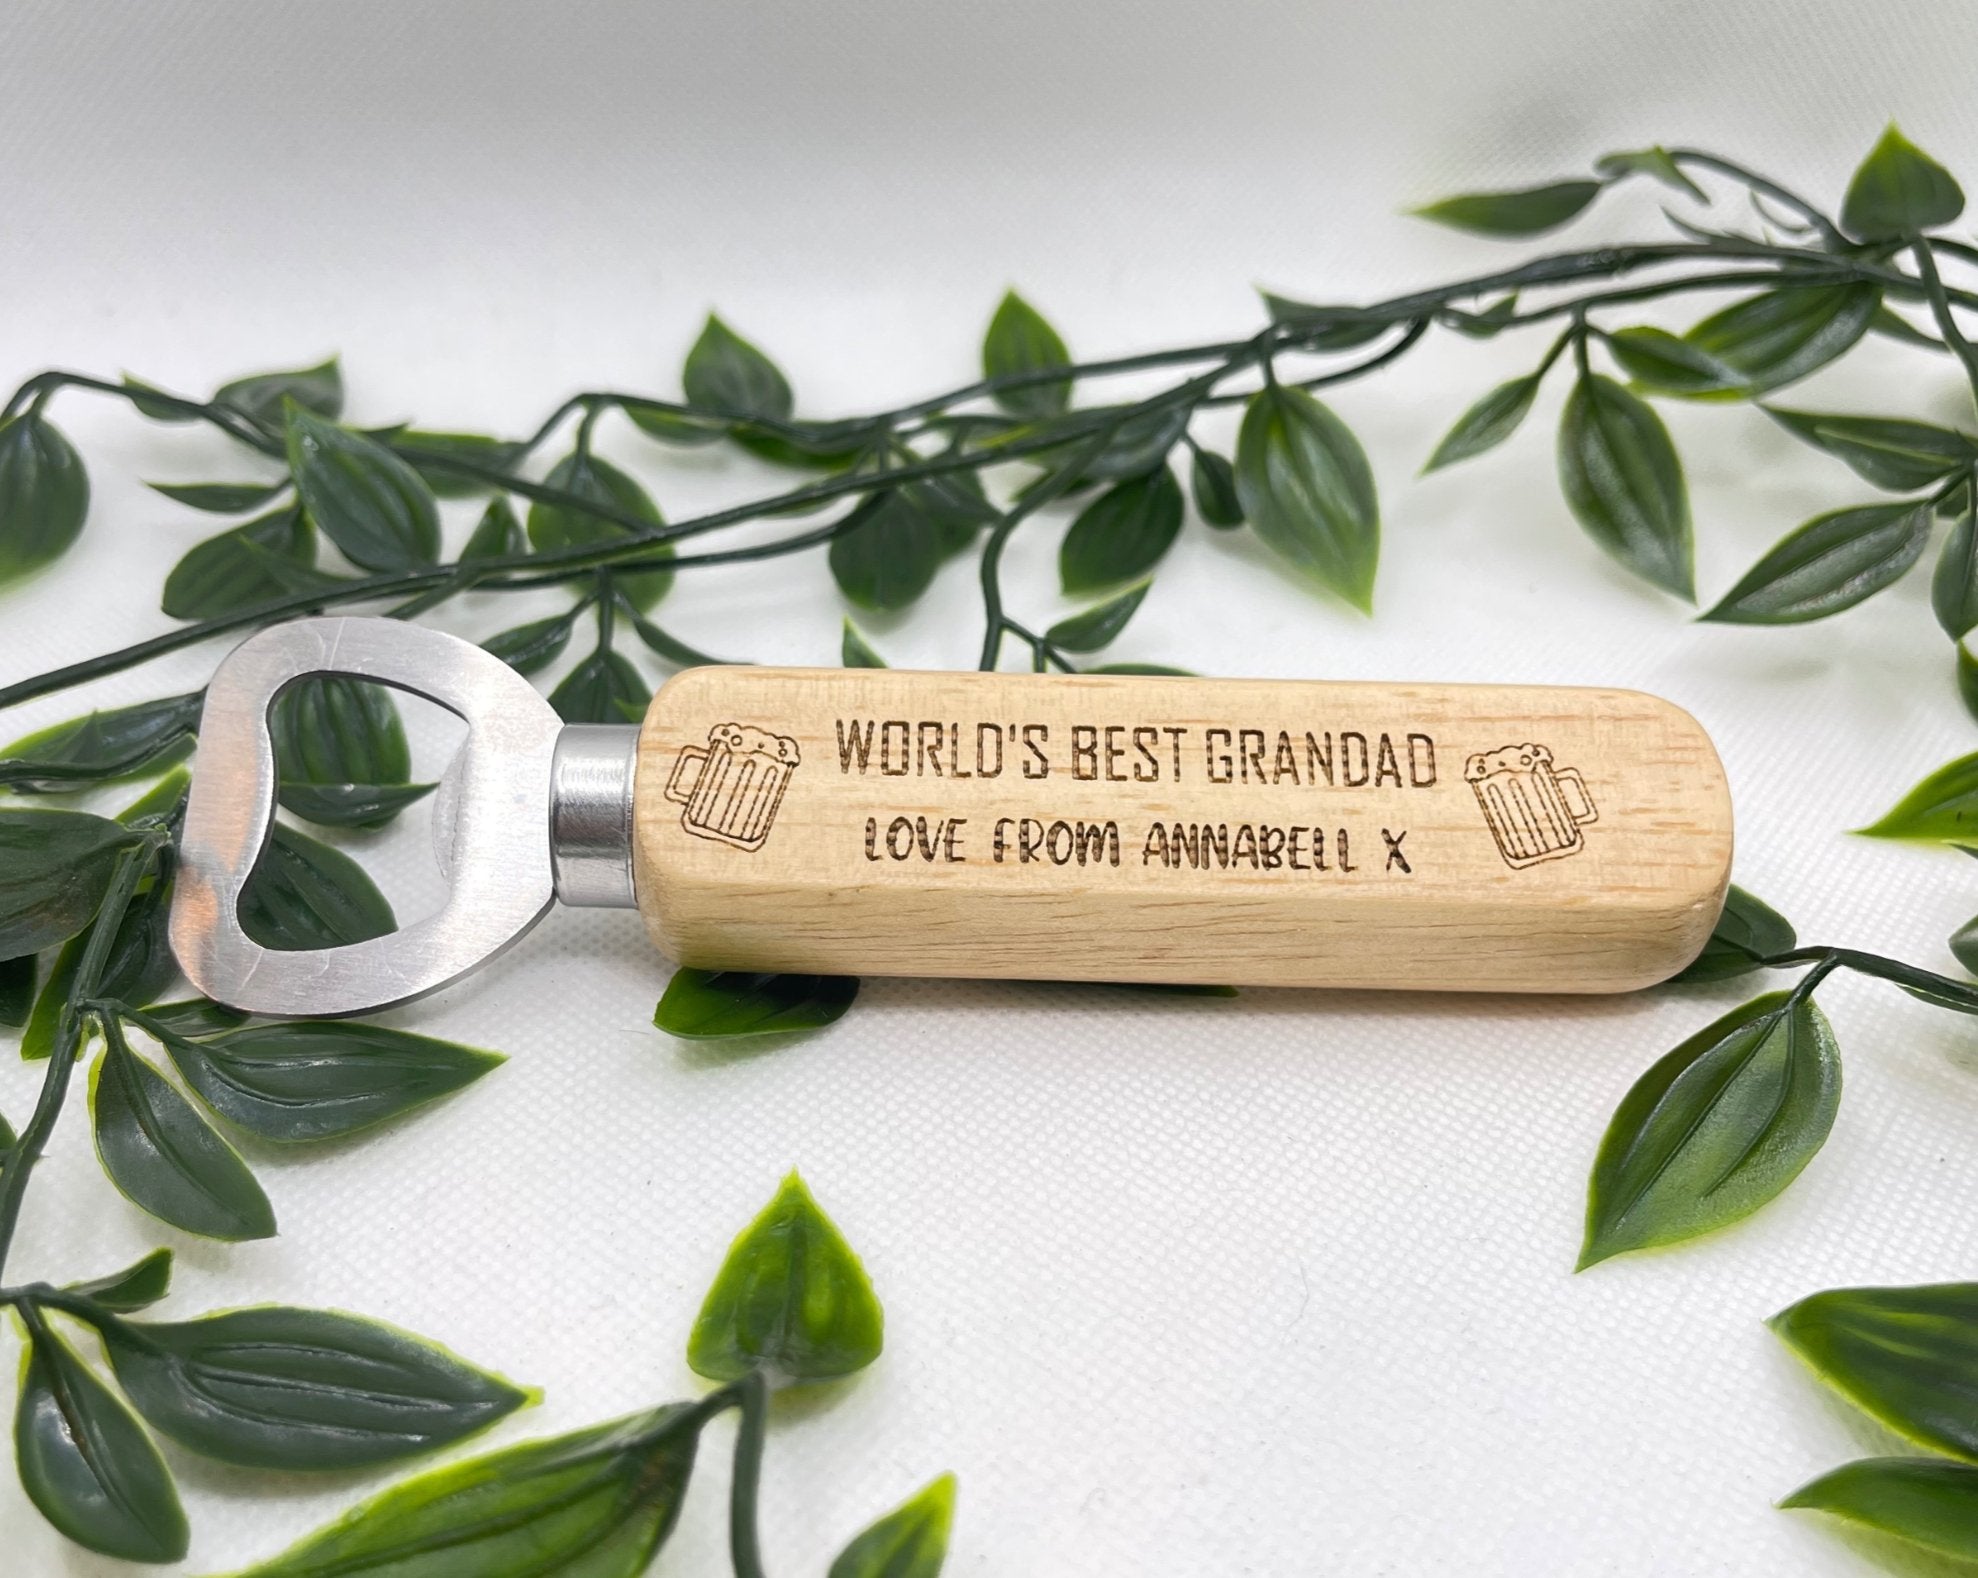 Stylish Personalised Wooden Bottle Opener - Crafted from premium wood and stainless steel - Customise with 'World's Best' engraving - Add a special 'love from' message - Whimsical beer jug icon - A thoughtful and unique gift for any occasion.